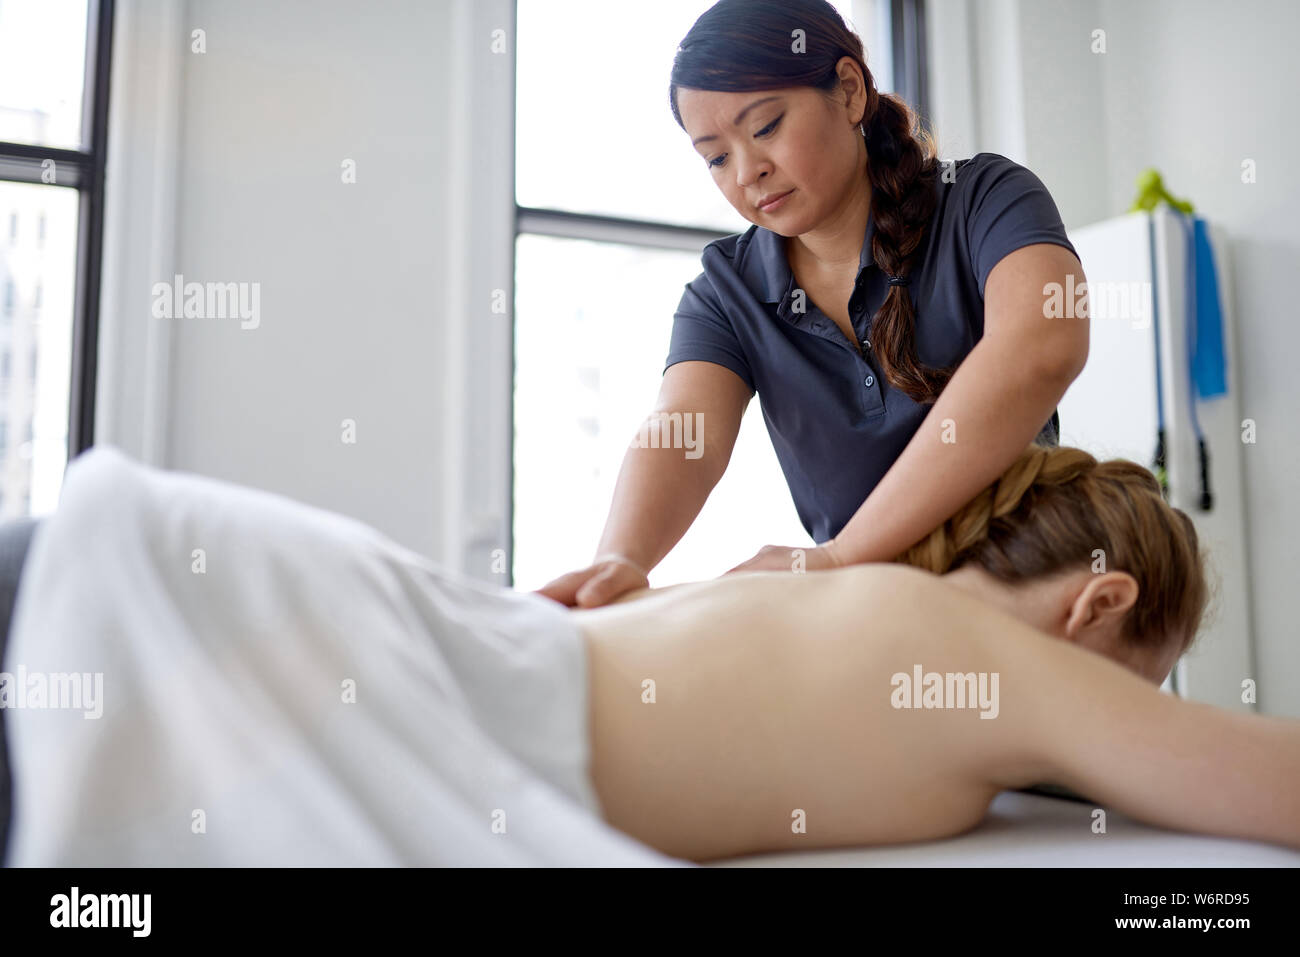 Chinese woman massage therapist giving a treatment to an attractive blond client on massage table in a bright medical office Stock Photo